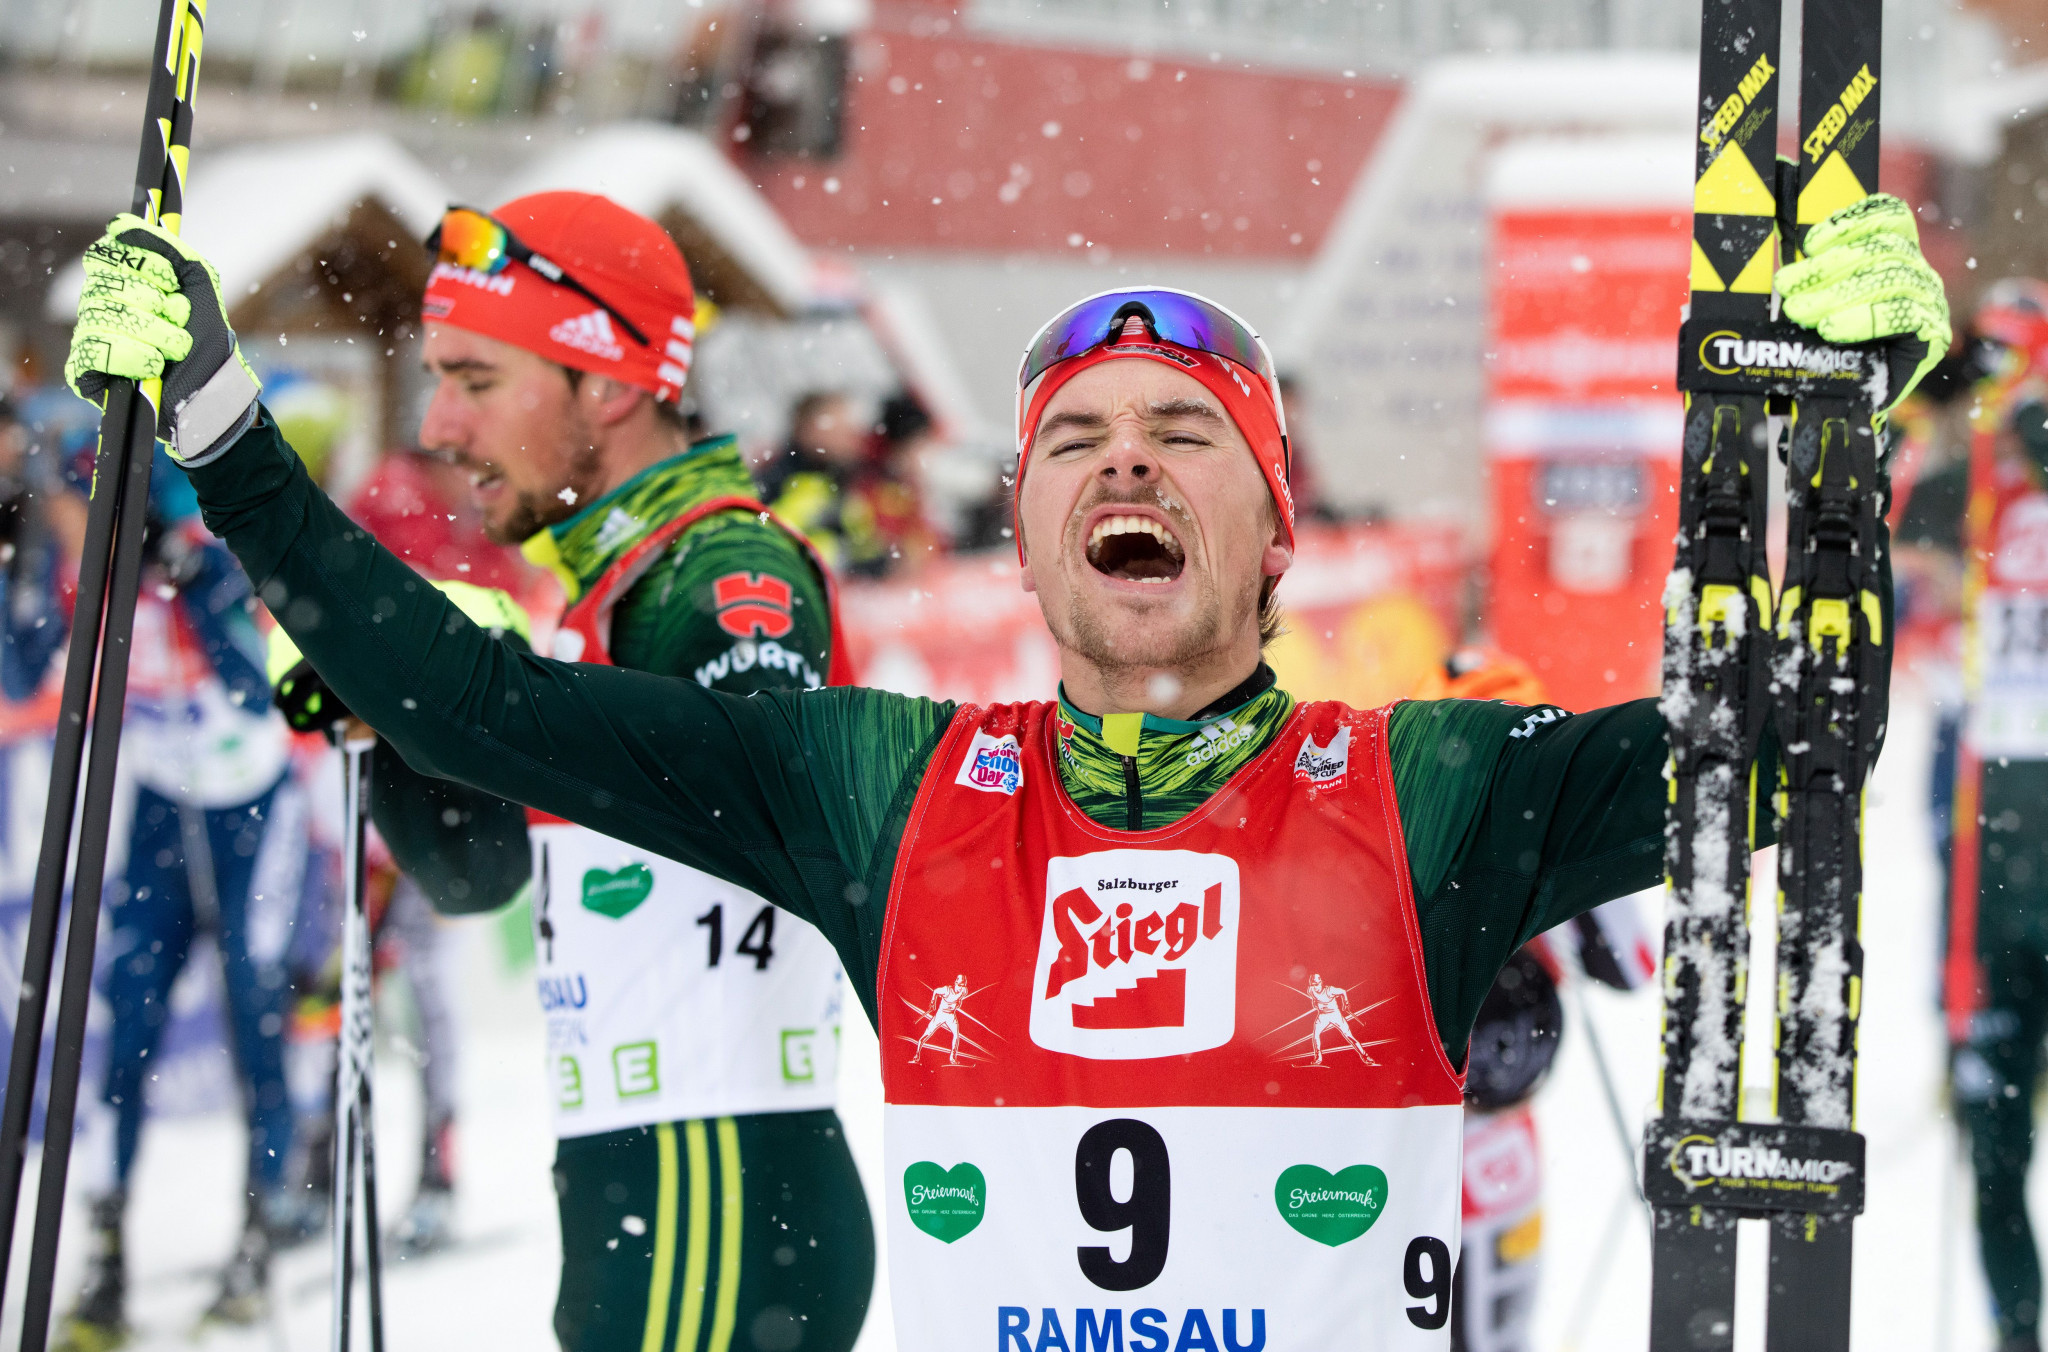 Rießle clinches Nordic Combined World Cup win as Schmid takes overall lead